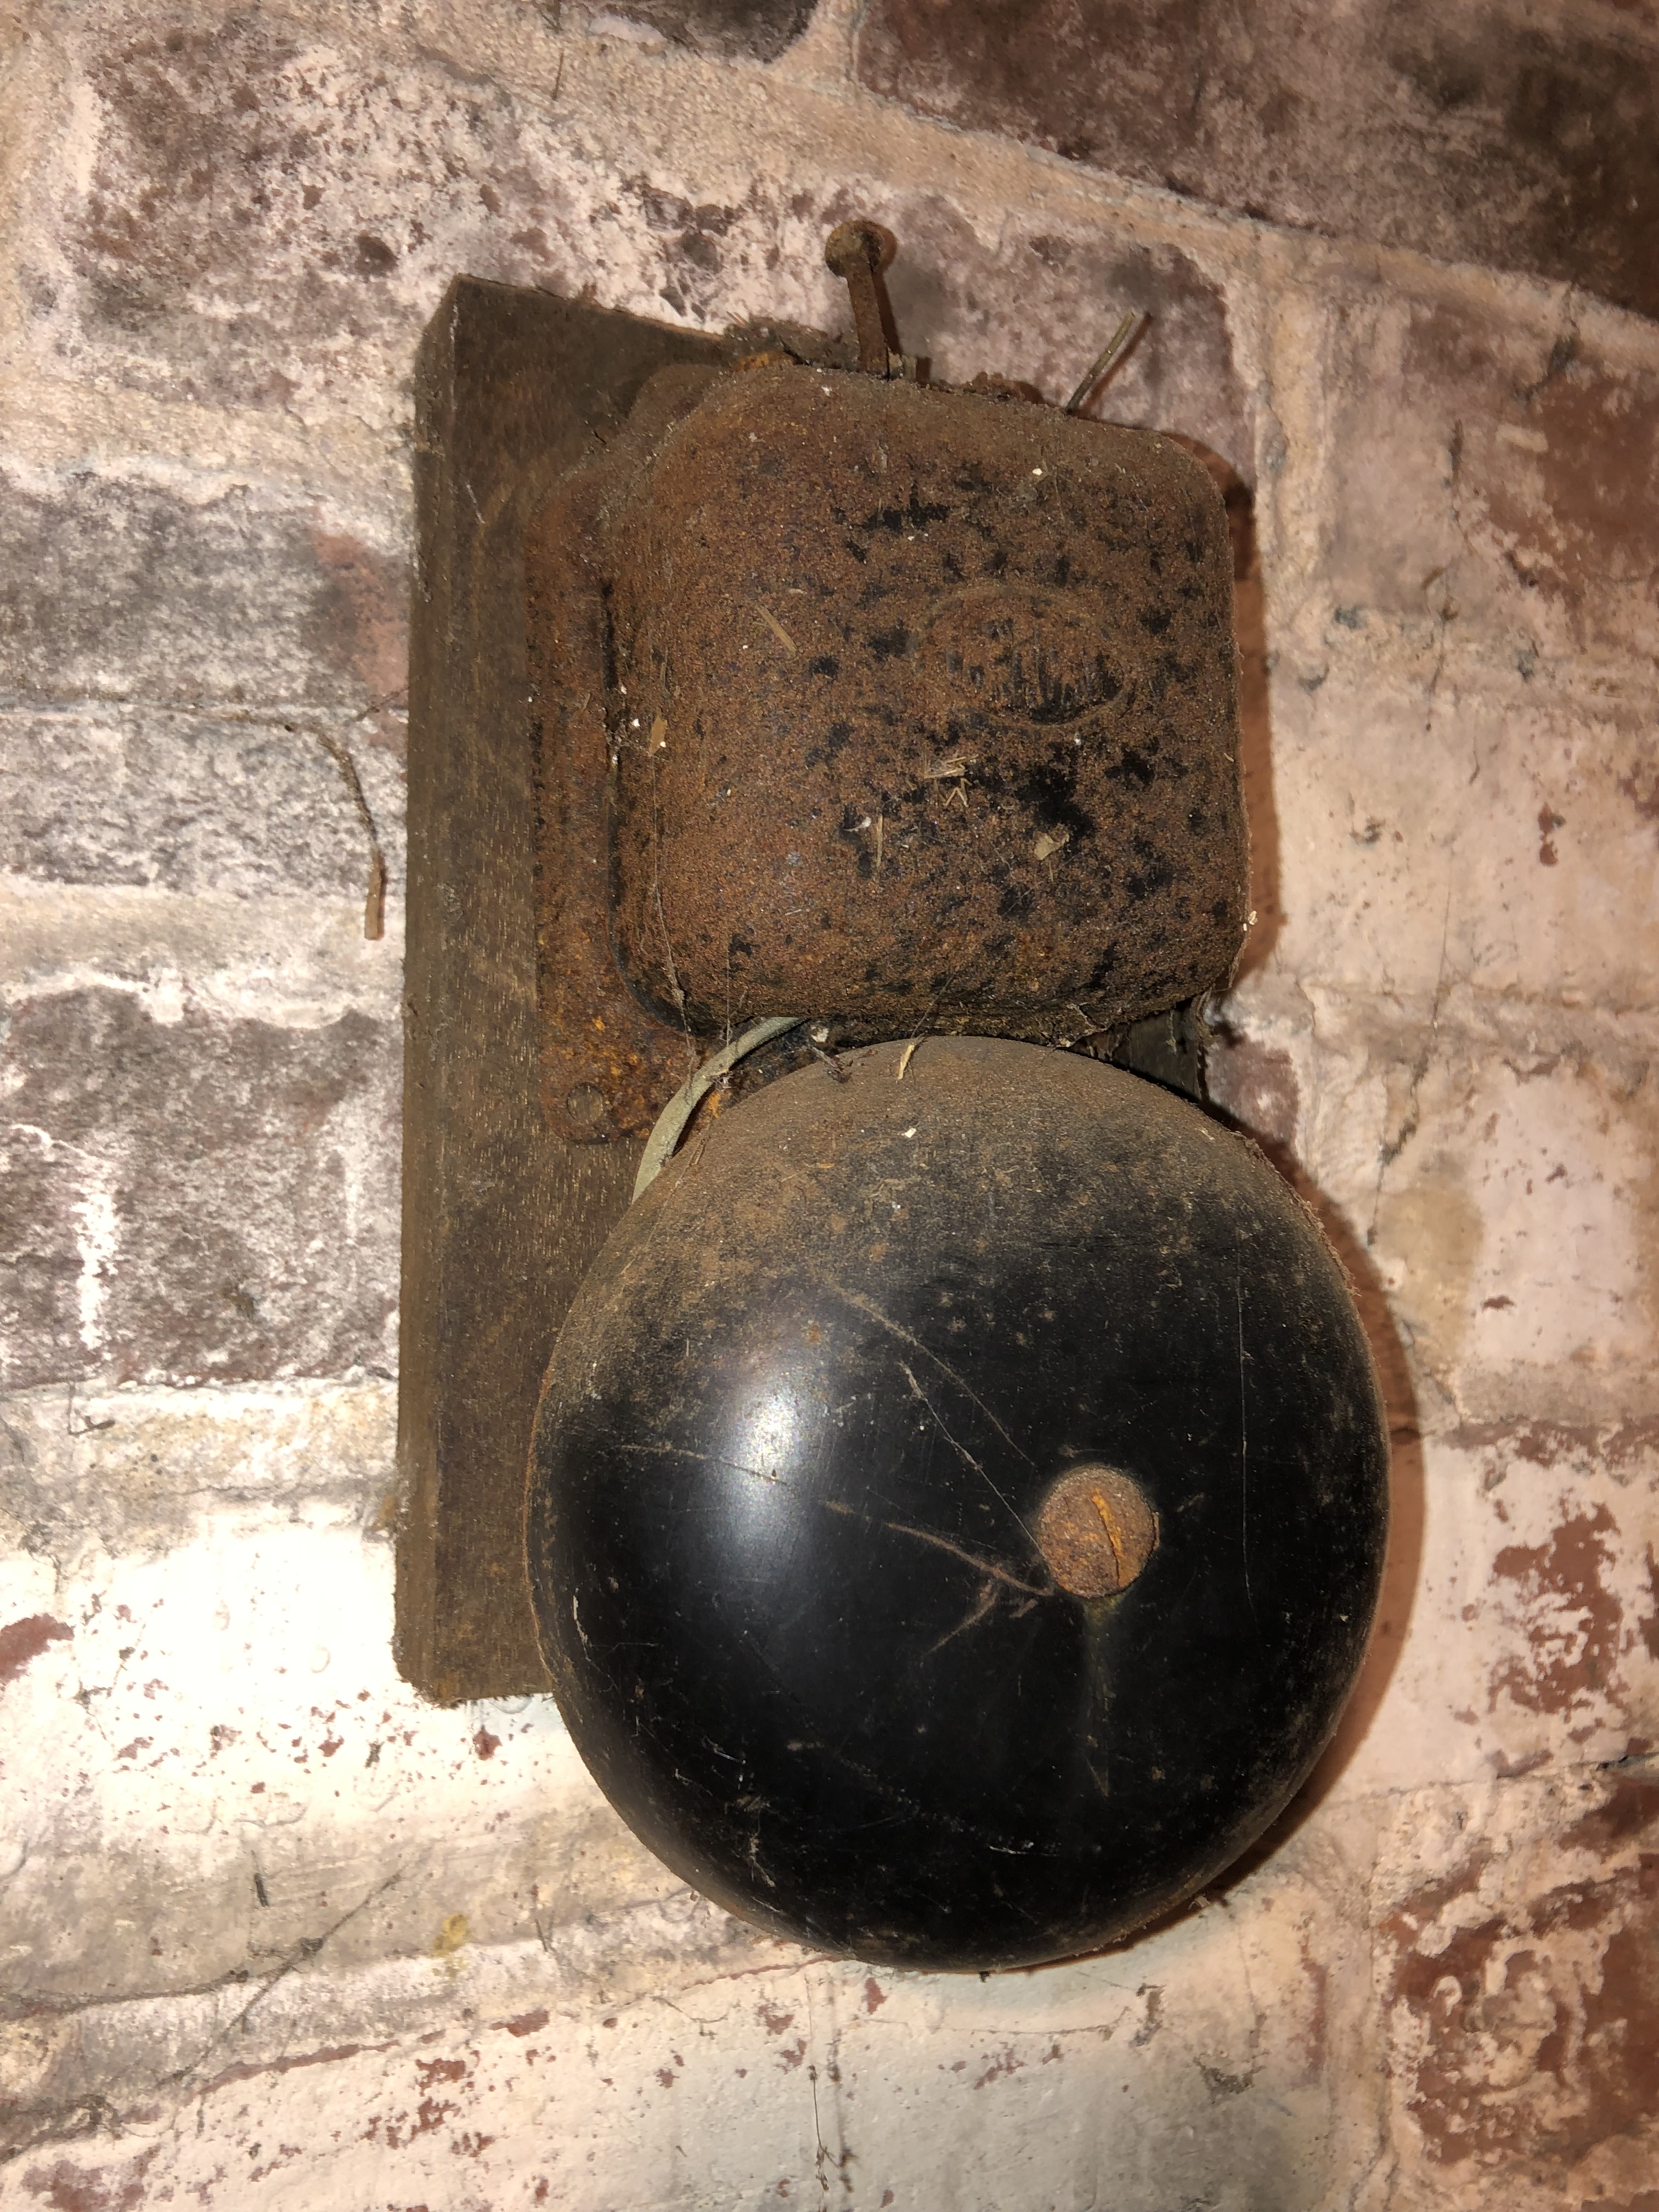 The Faraday signal bell in the Barn cellar of the Old Schwamb Mill